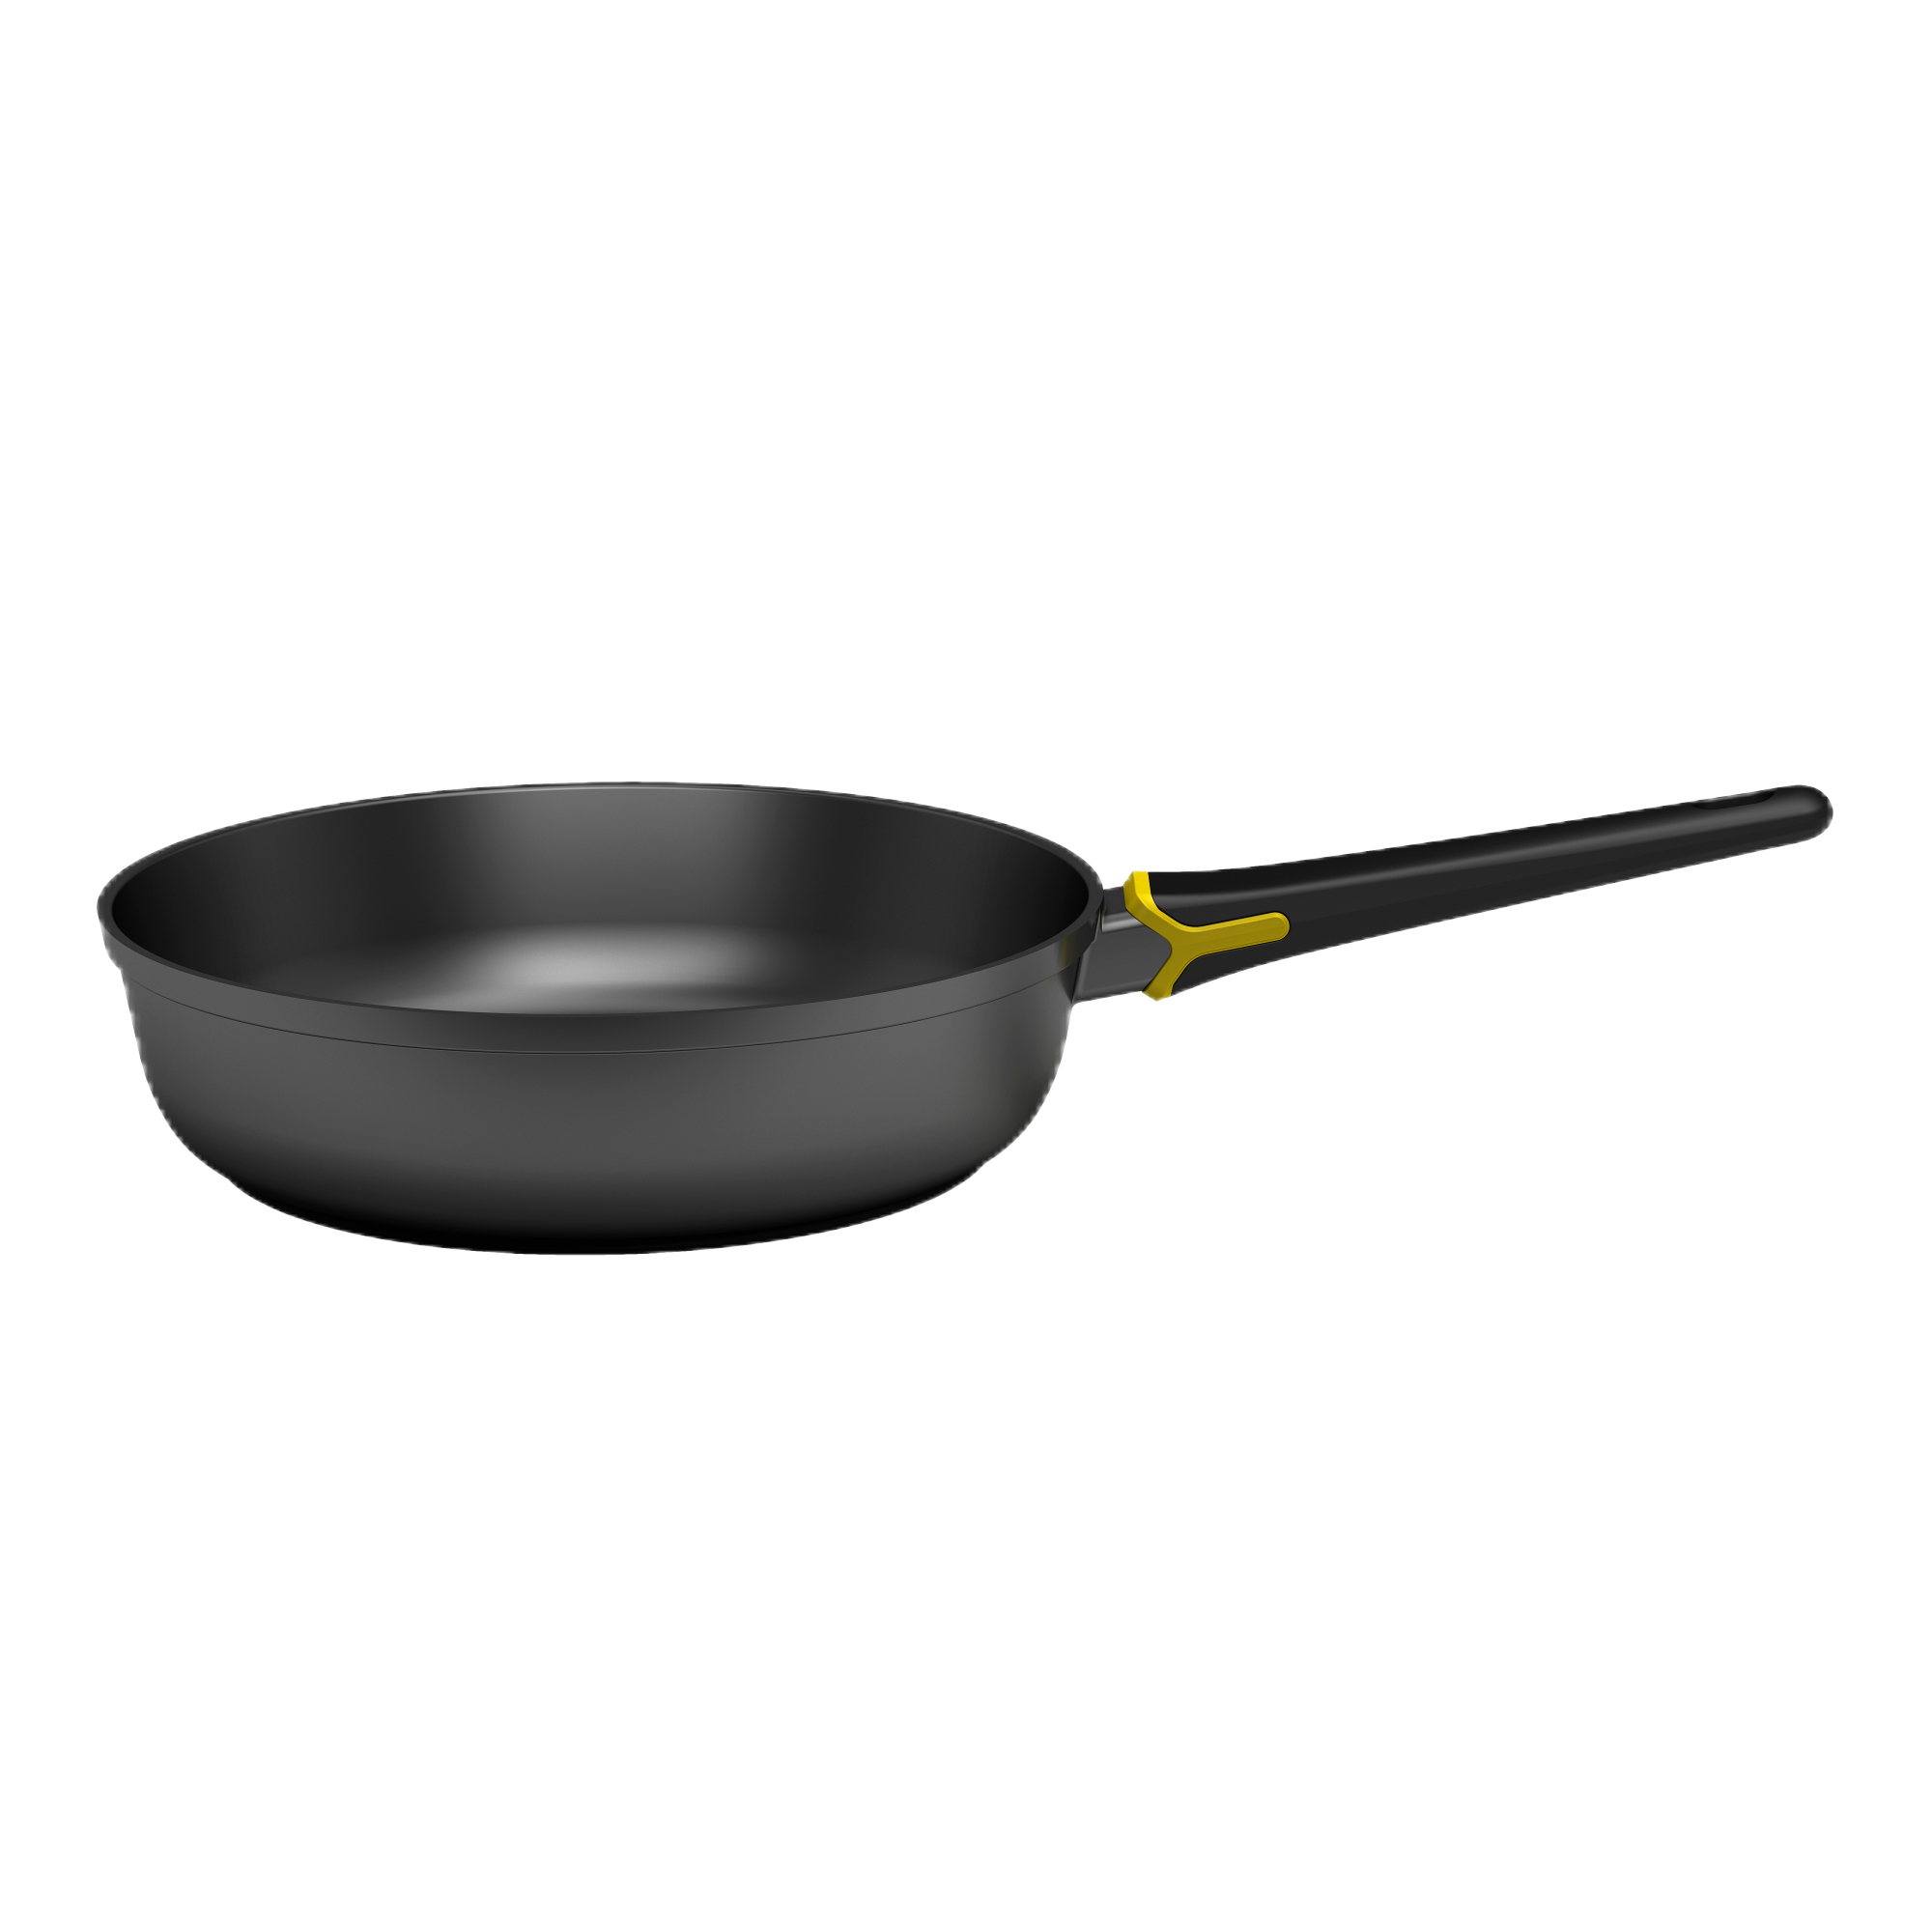 YOUNG RangeThermo Silicone Heat Indicator Non-stick Cookware Die Cast Aluminum Deep Frypan Without Lid